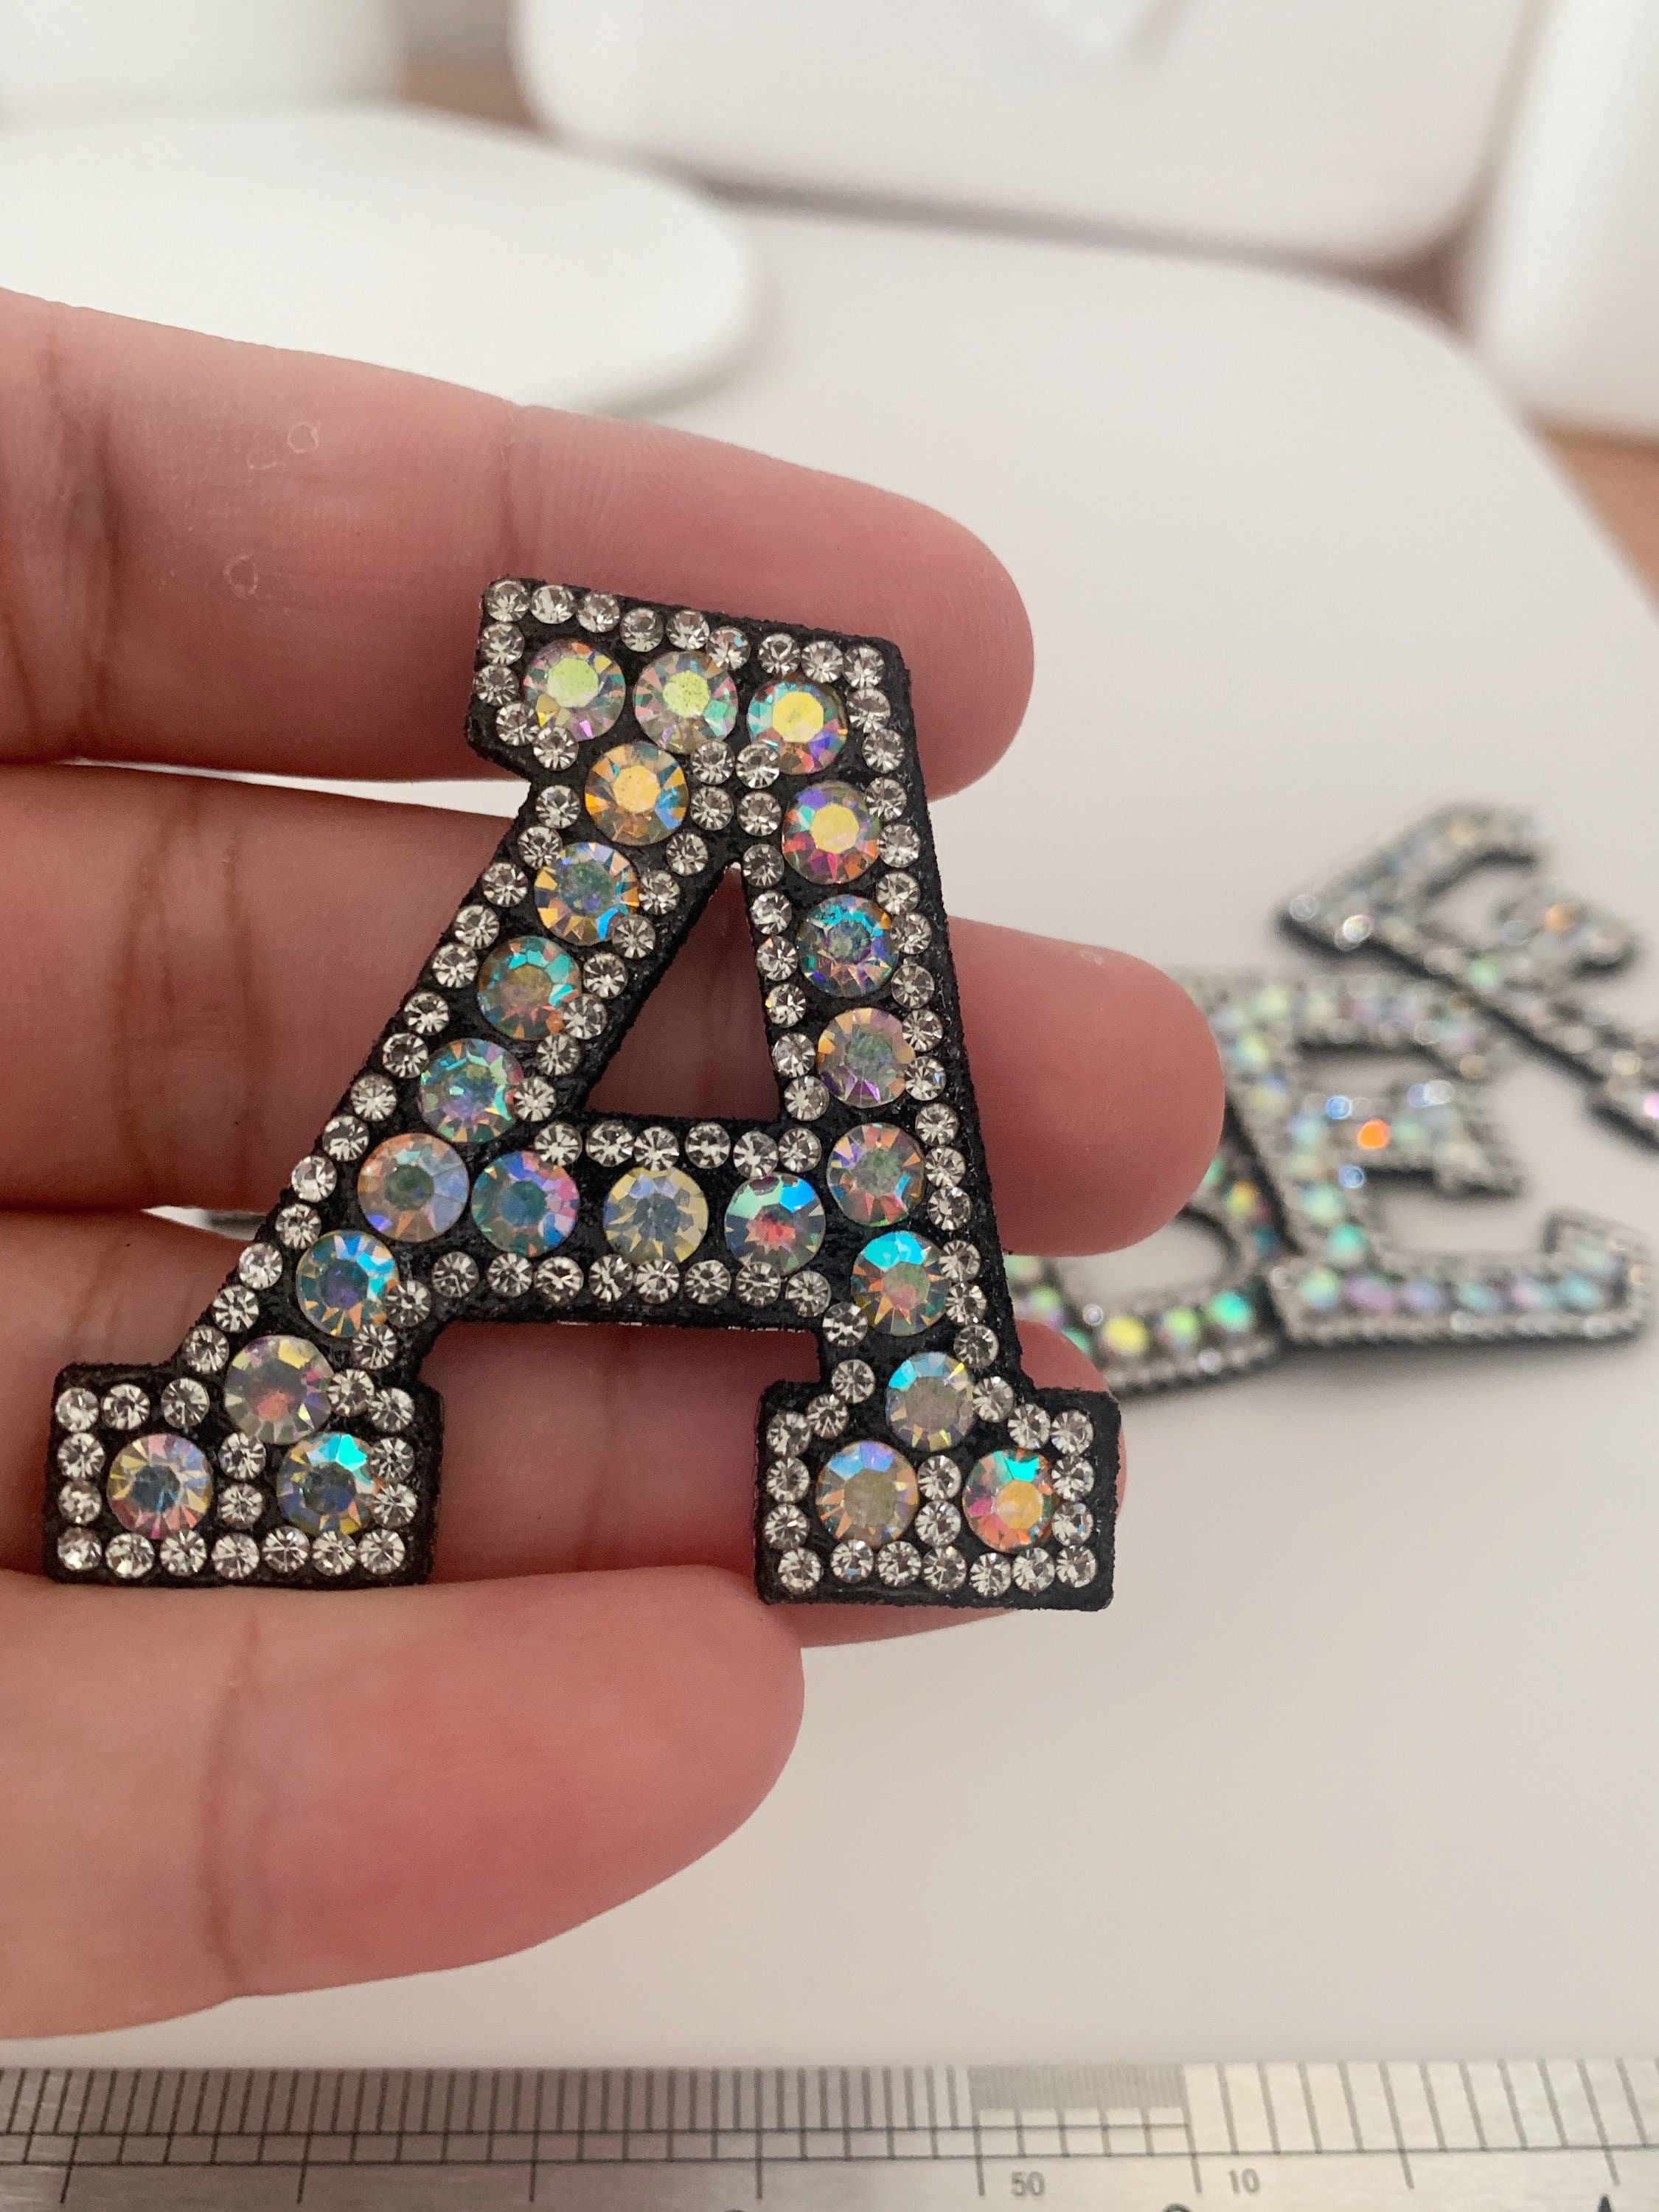 SUPERDANT Rhinestone Iron on Hotfix Transfer Decal Girl Magic Colorful Bling  Patch Clothing Repair Applique T-Shirt Vest Shoes Hat Jacket Decor Clothing  DIY Accessories 